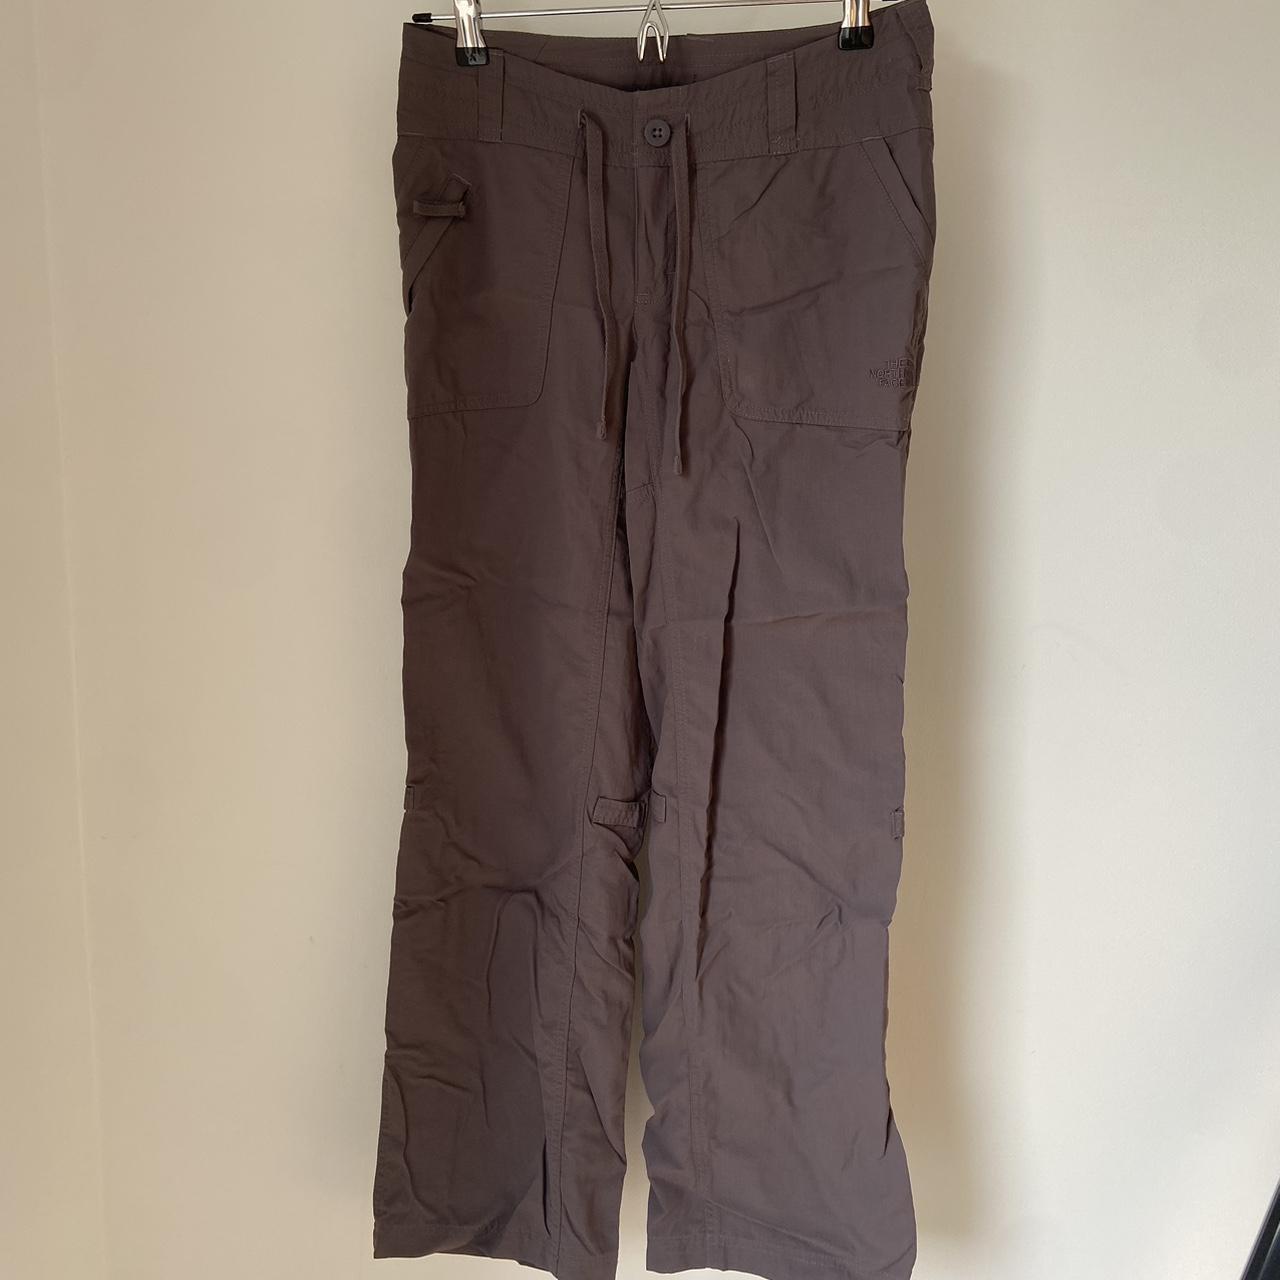 Grey The North Face hiking pants. These pants are so - Depop